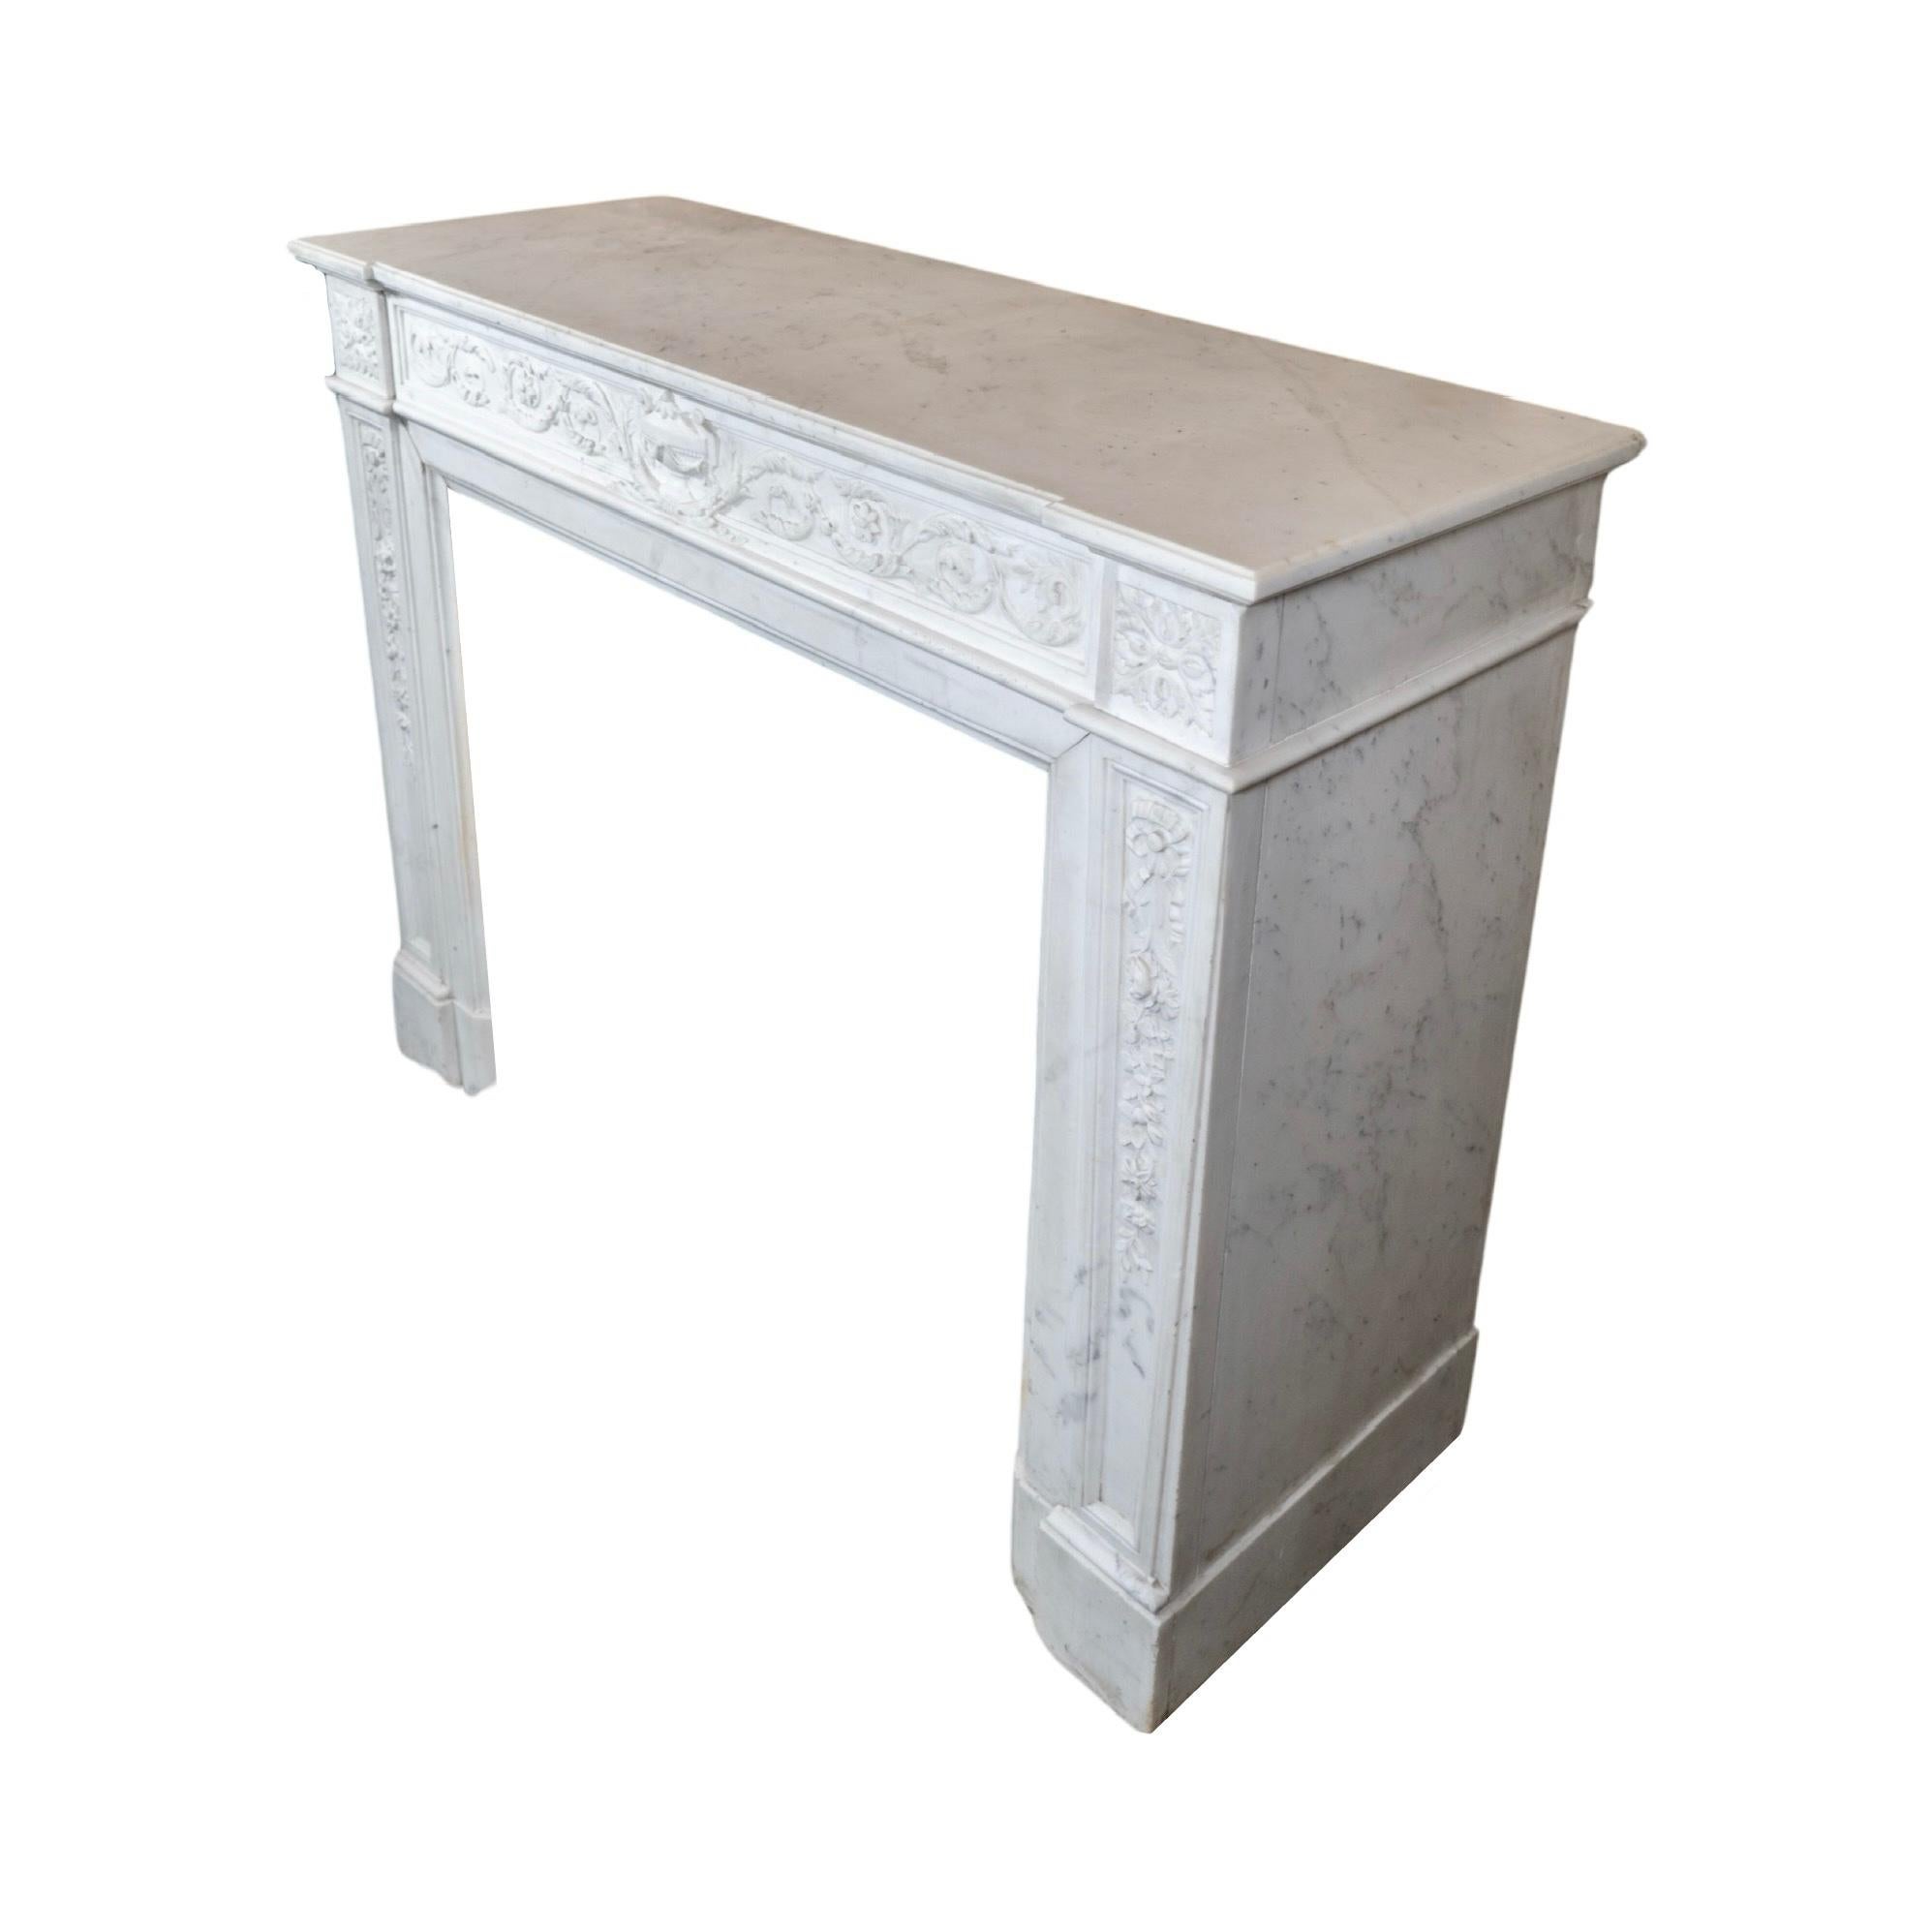 Mid-19th Century Carrara Marble Mantel from France For Sale 1